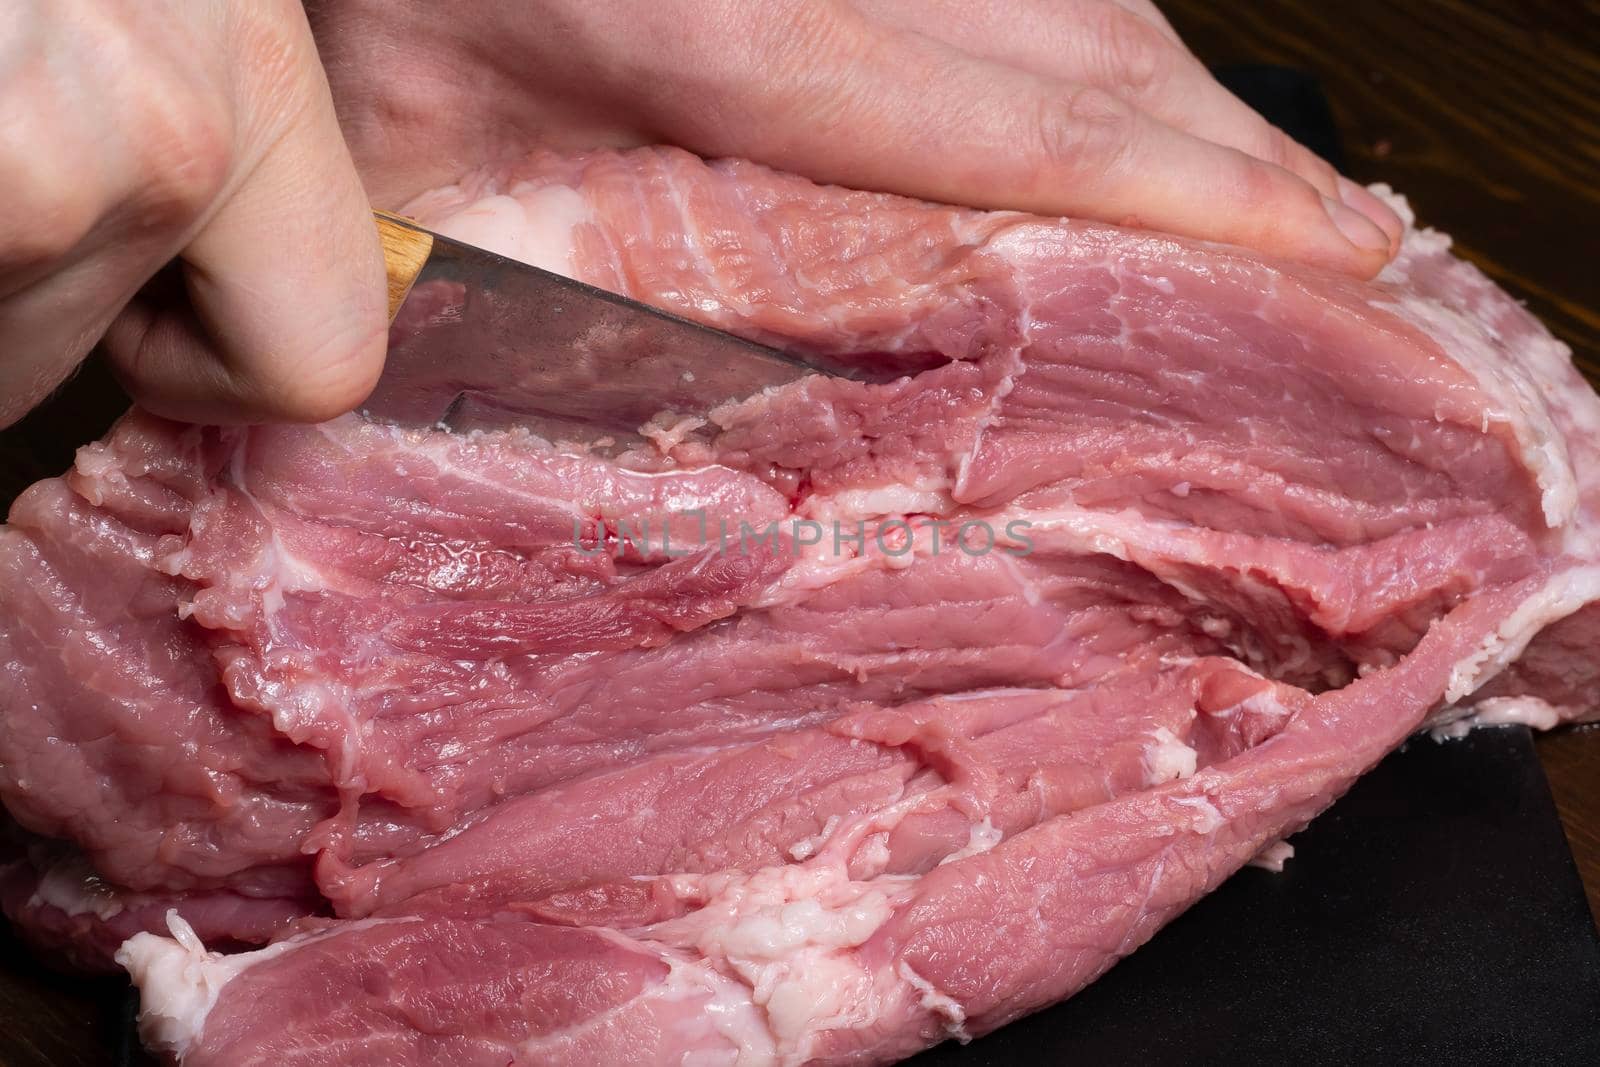 Slice the pork or beef with a knife on the table in close-up.Preparation of meat dishes and food products.Pieces of red meat for shish kebab,barbecue or kebab.Raw fresh meat is cut with a knife.recipe by YevgeniySam